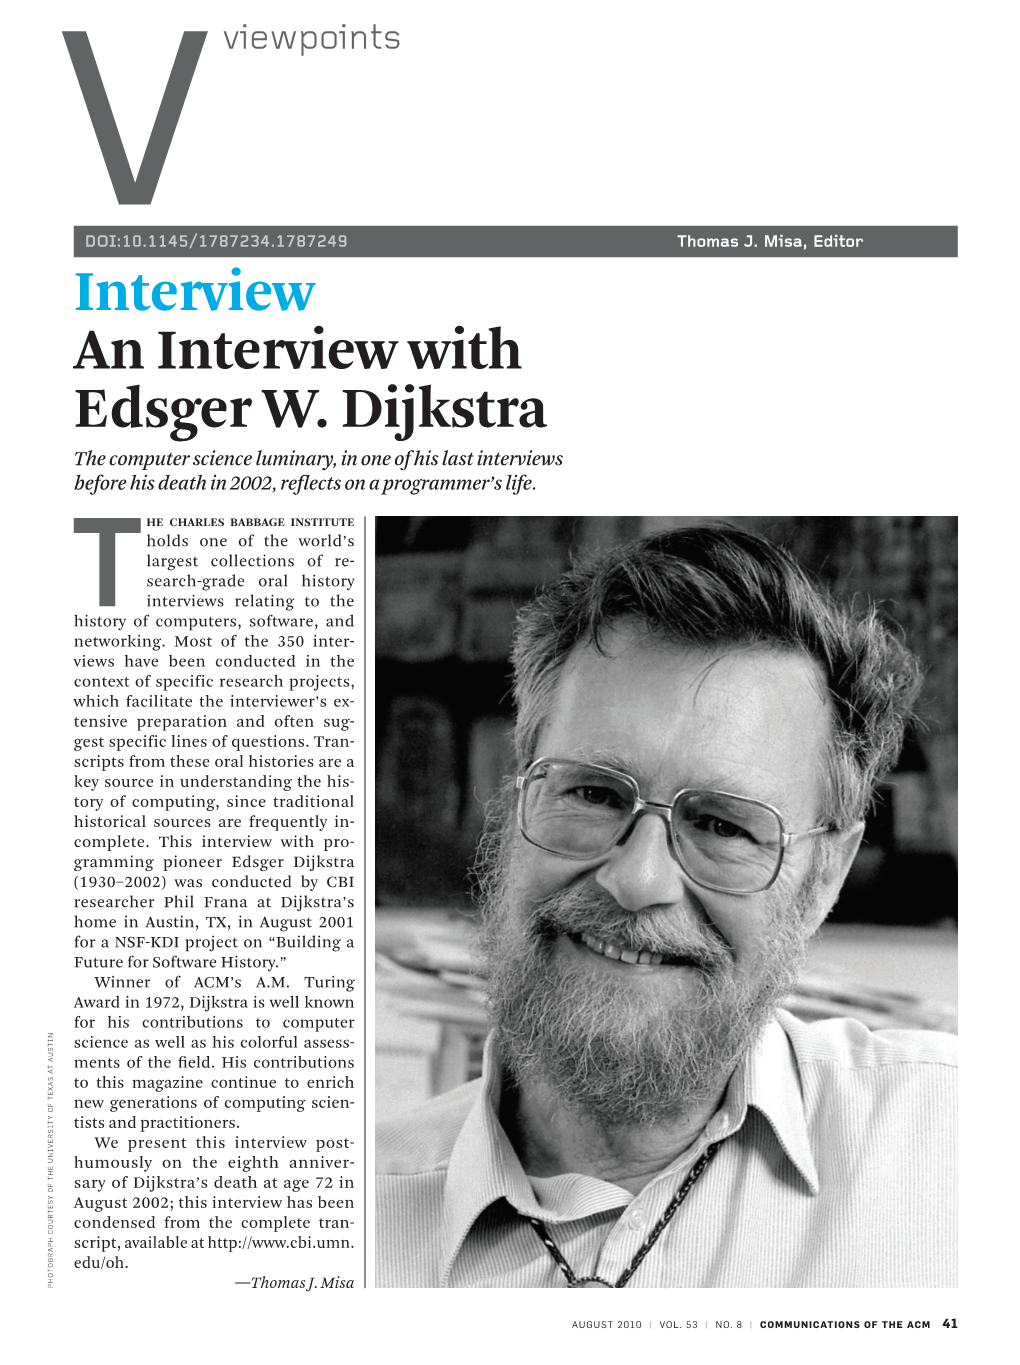 An Interview with Edsger W. Dijkstra the Computer Science Luminary, in One of His Last Interviews Before His Death in 2002, Reflects on a Programmer’S Life